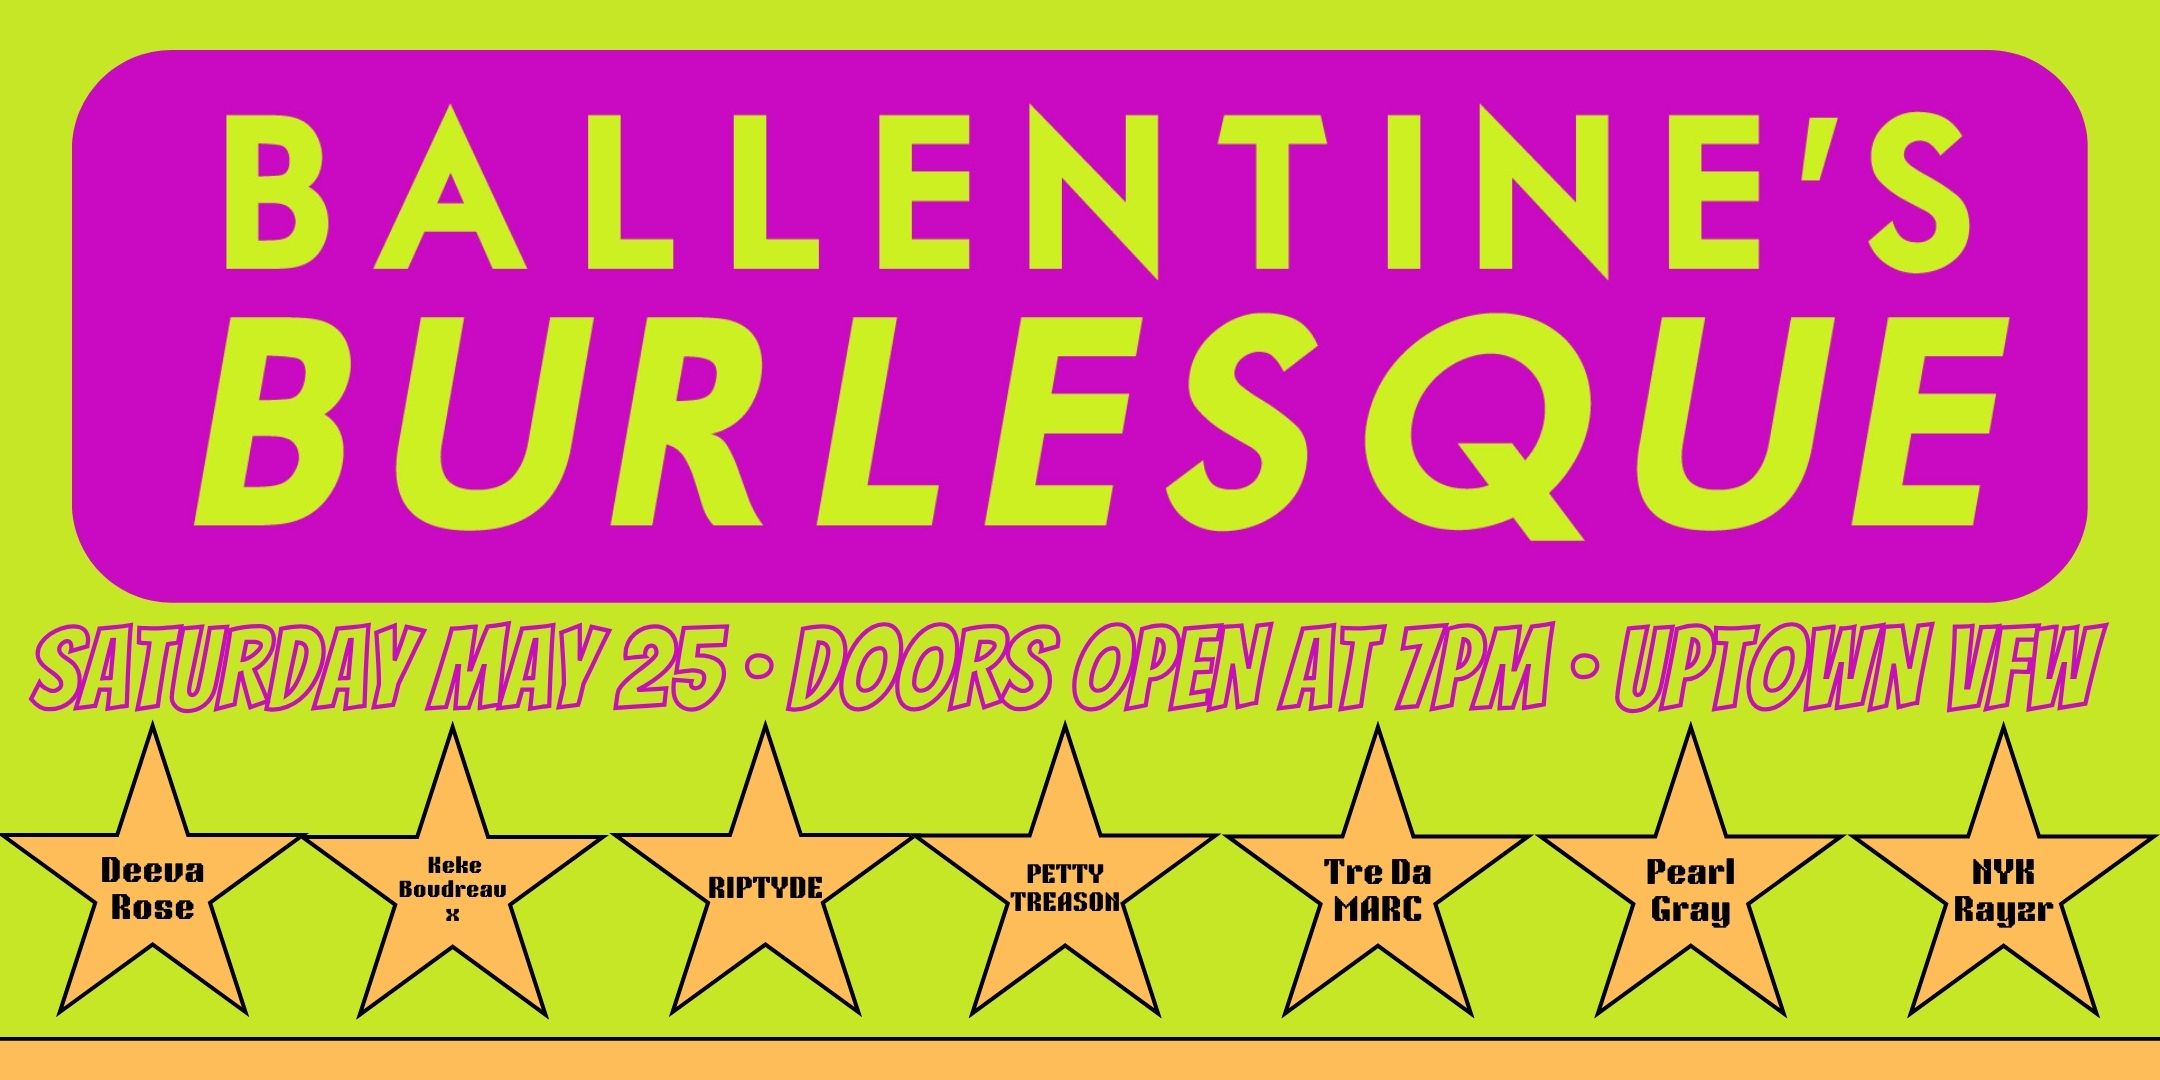 Ballentine's Burlesque Performances by Deeva Rose · Keke Boudreaux · RipTyde · Petty Treason · Tre Da Marc · Pearl Grey · Nyk Rayzr · FNK & more! Saturday, May 25 James Ballentine "Uptown" VFW Post 246 Doors 7:00pm :: Show 8:00pm :: 21+ GA $10 ADV / $15 DOS NO REFUNDS Ticket On-Sale Now